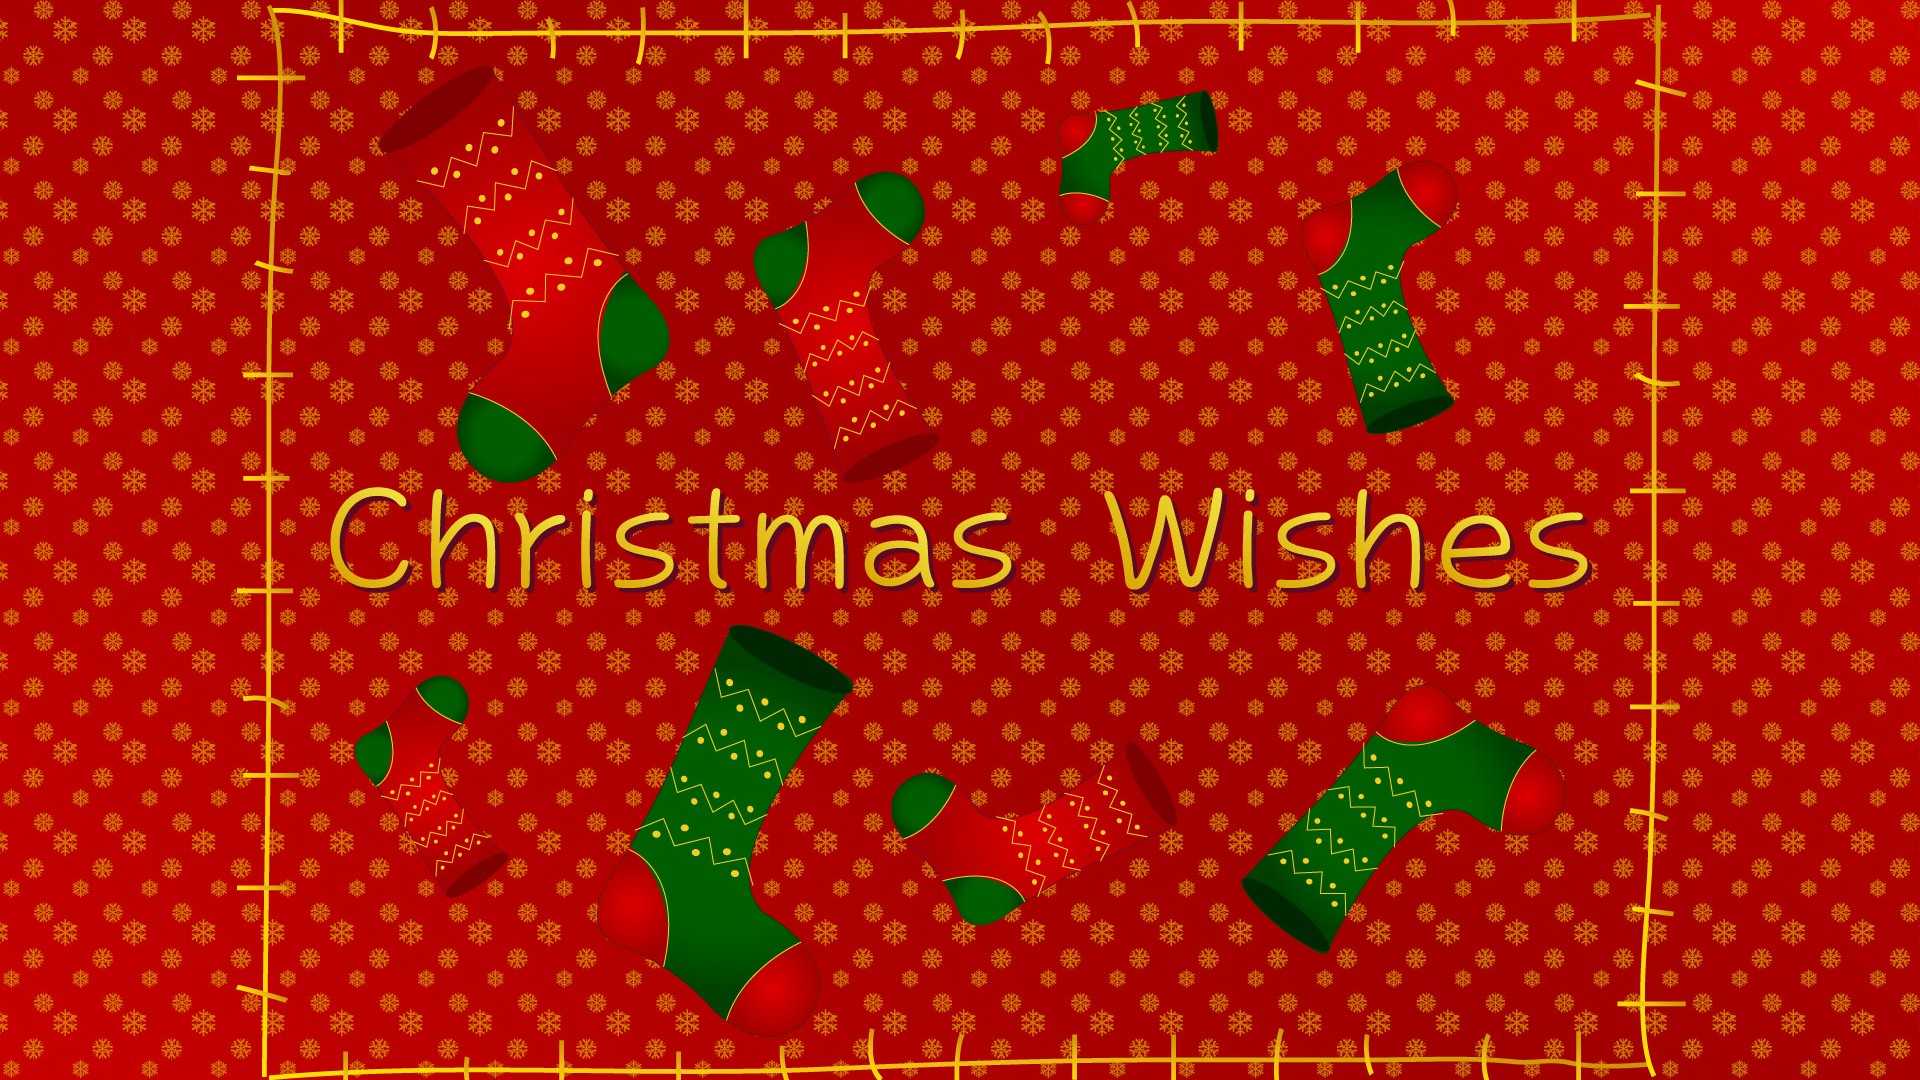 Exquisite Christmas Theme HD Wallpapers #22 - 1920x1080